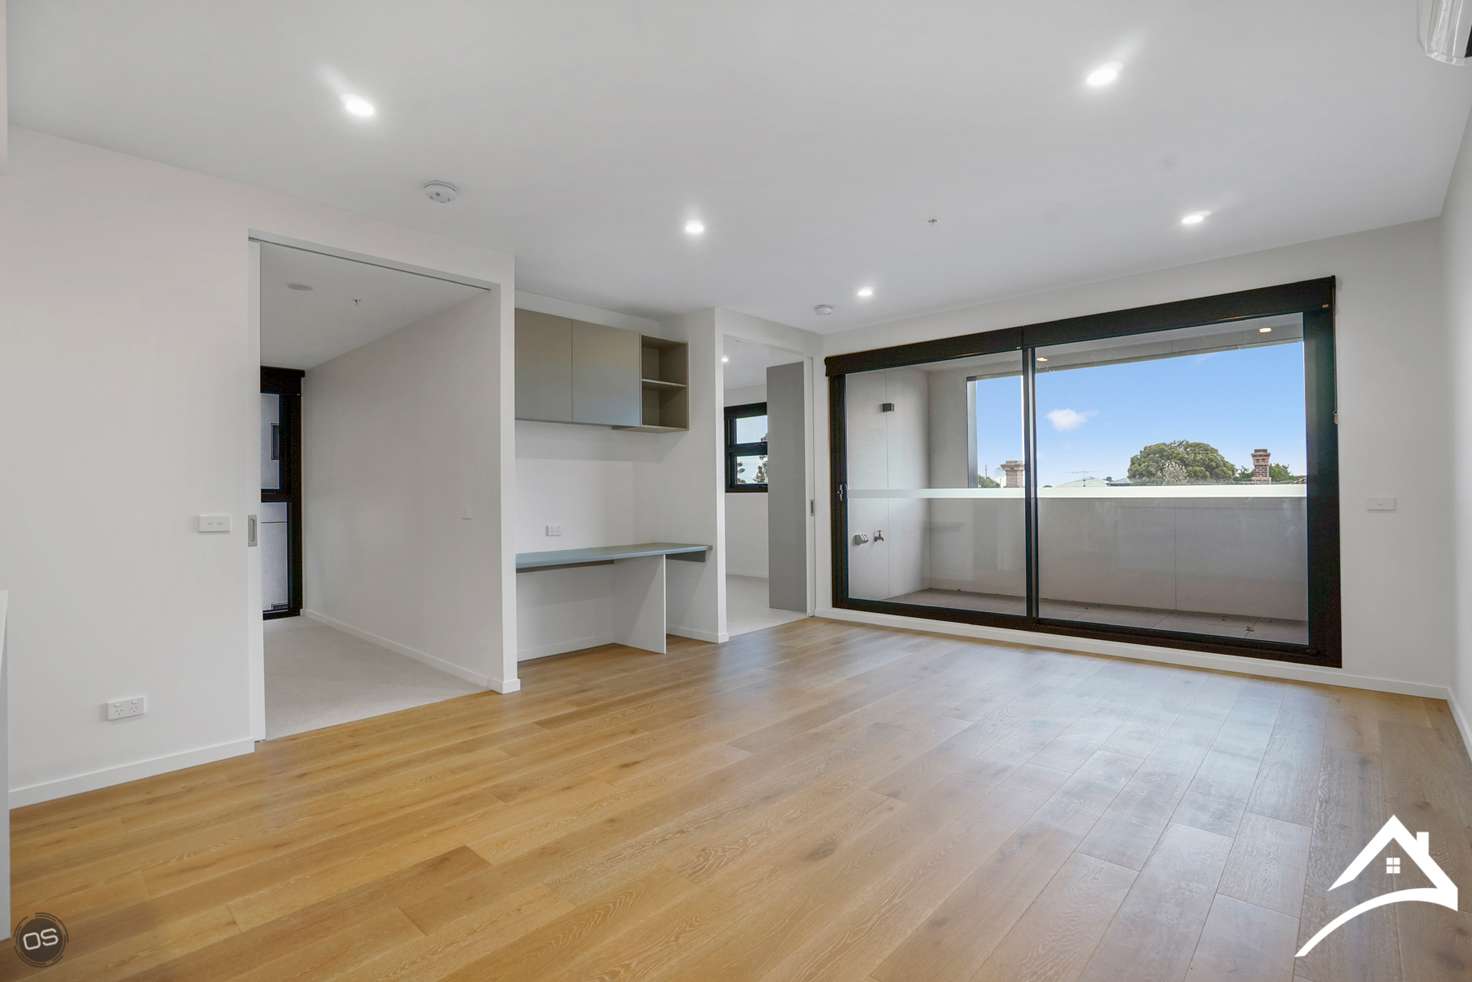 Main view of Homely apartment listing, 205/146 Bellerine Street, Geelong VIC 3220